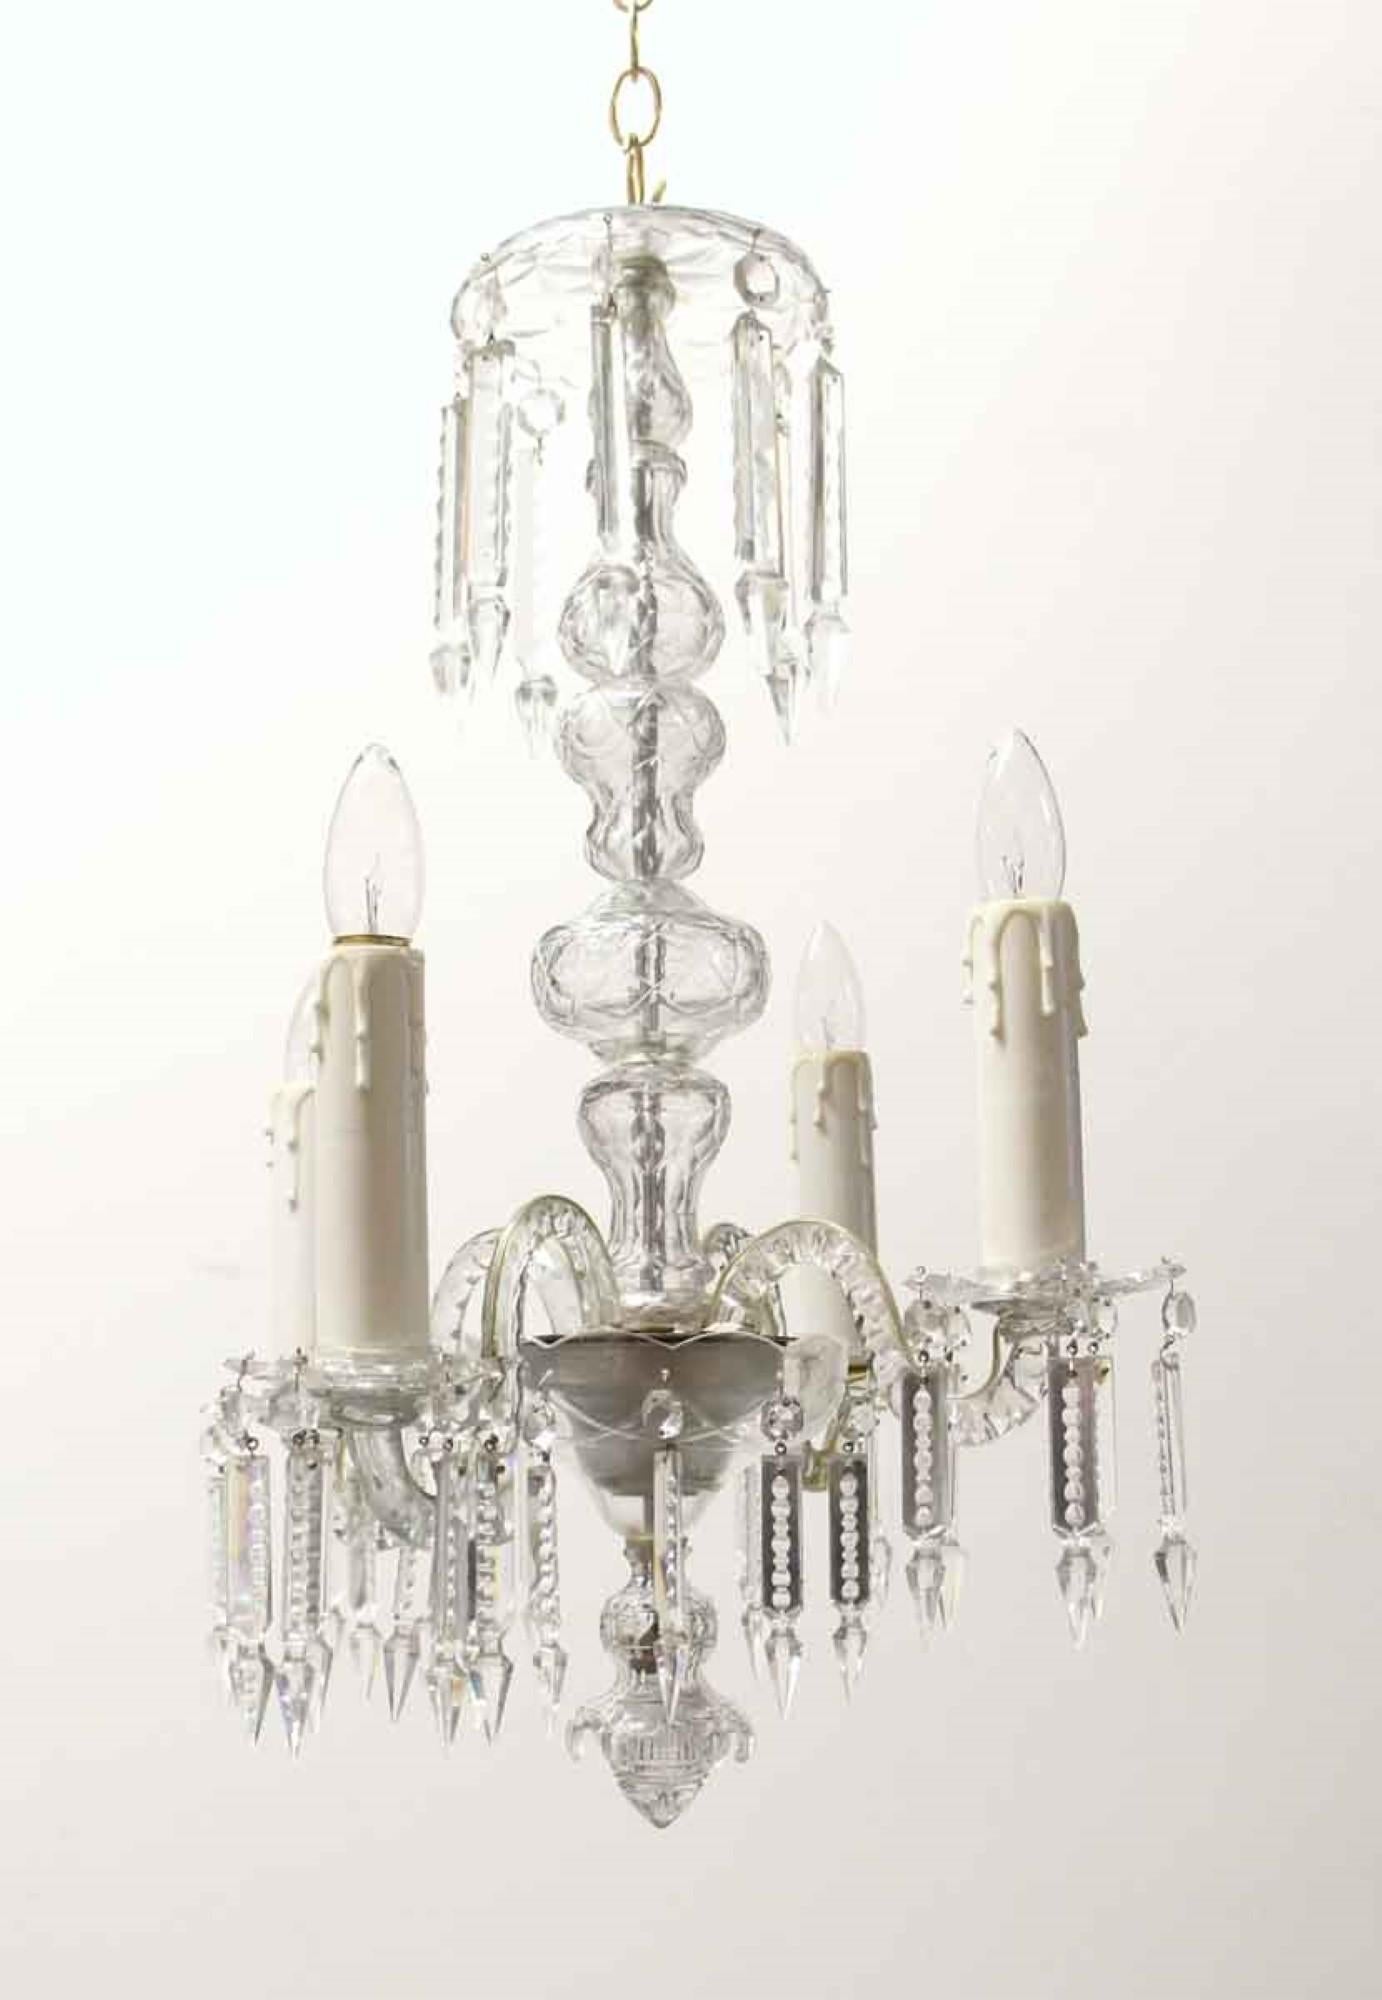 Baccarat Bohemian style four-arm clear crystal chandelier from the 1940s. One minor repair to one arm, please see photos. This can be seen at our 400 Gilligan St location in Scranton. PA.